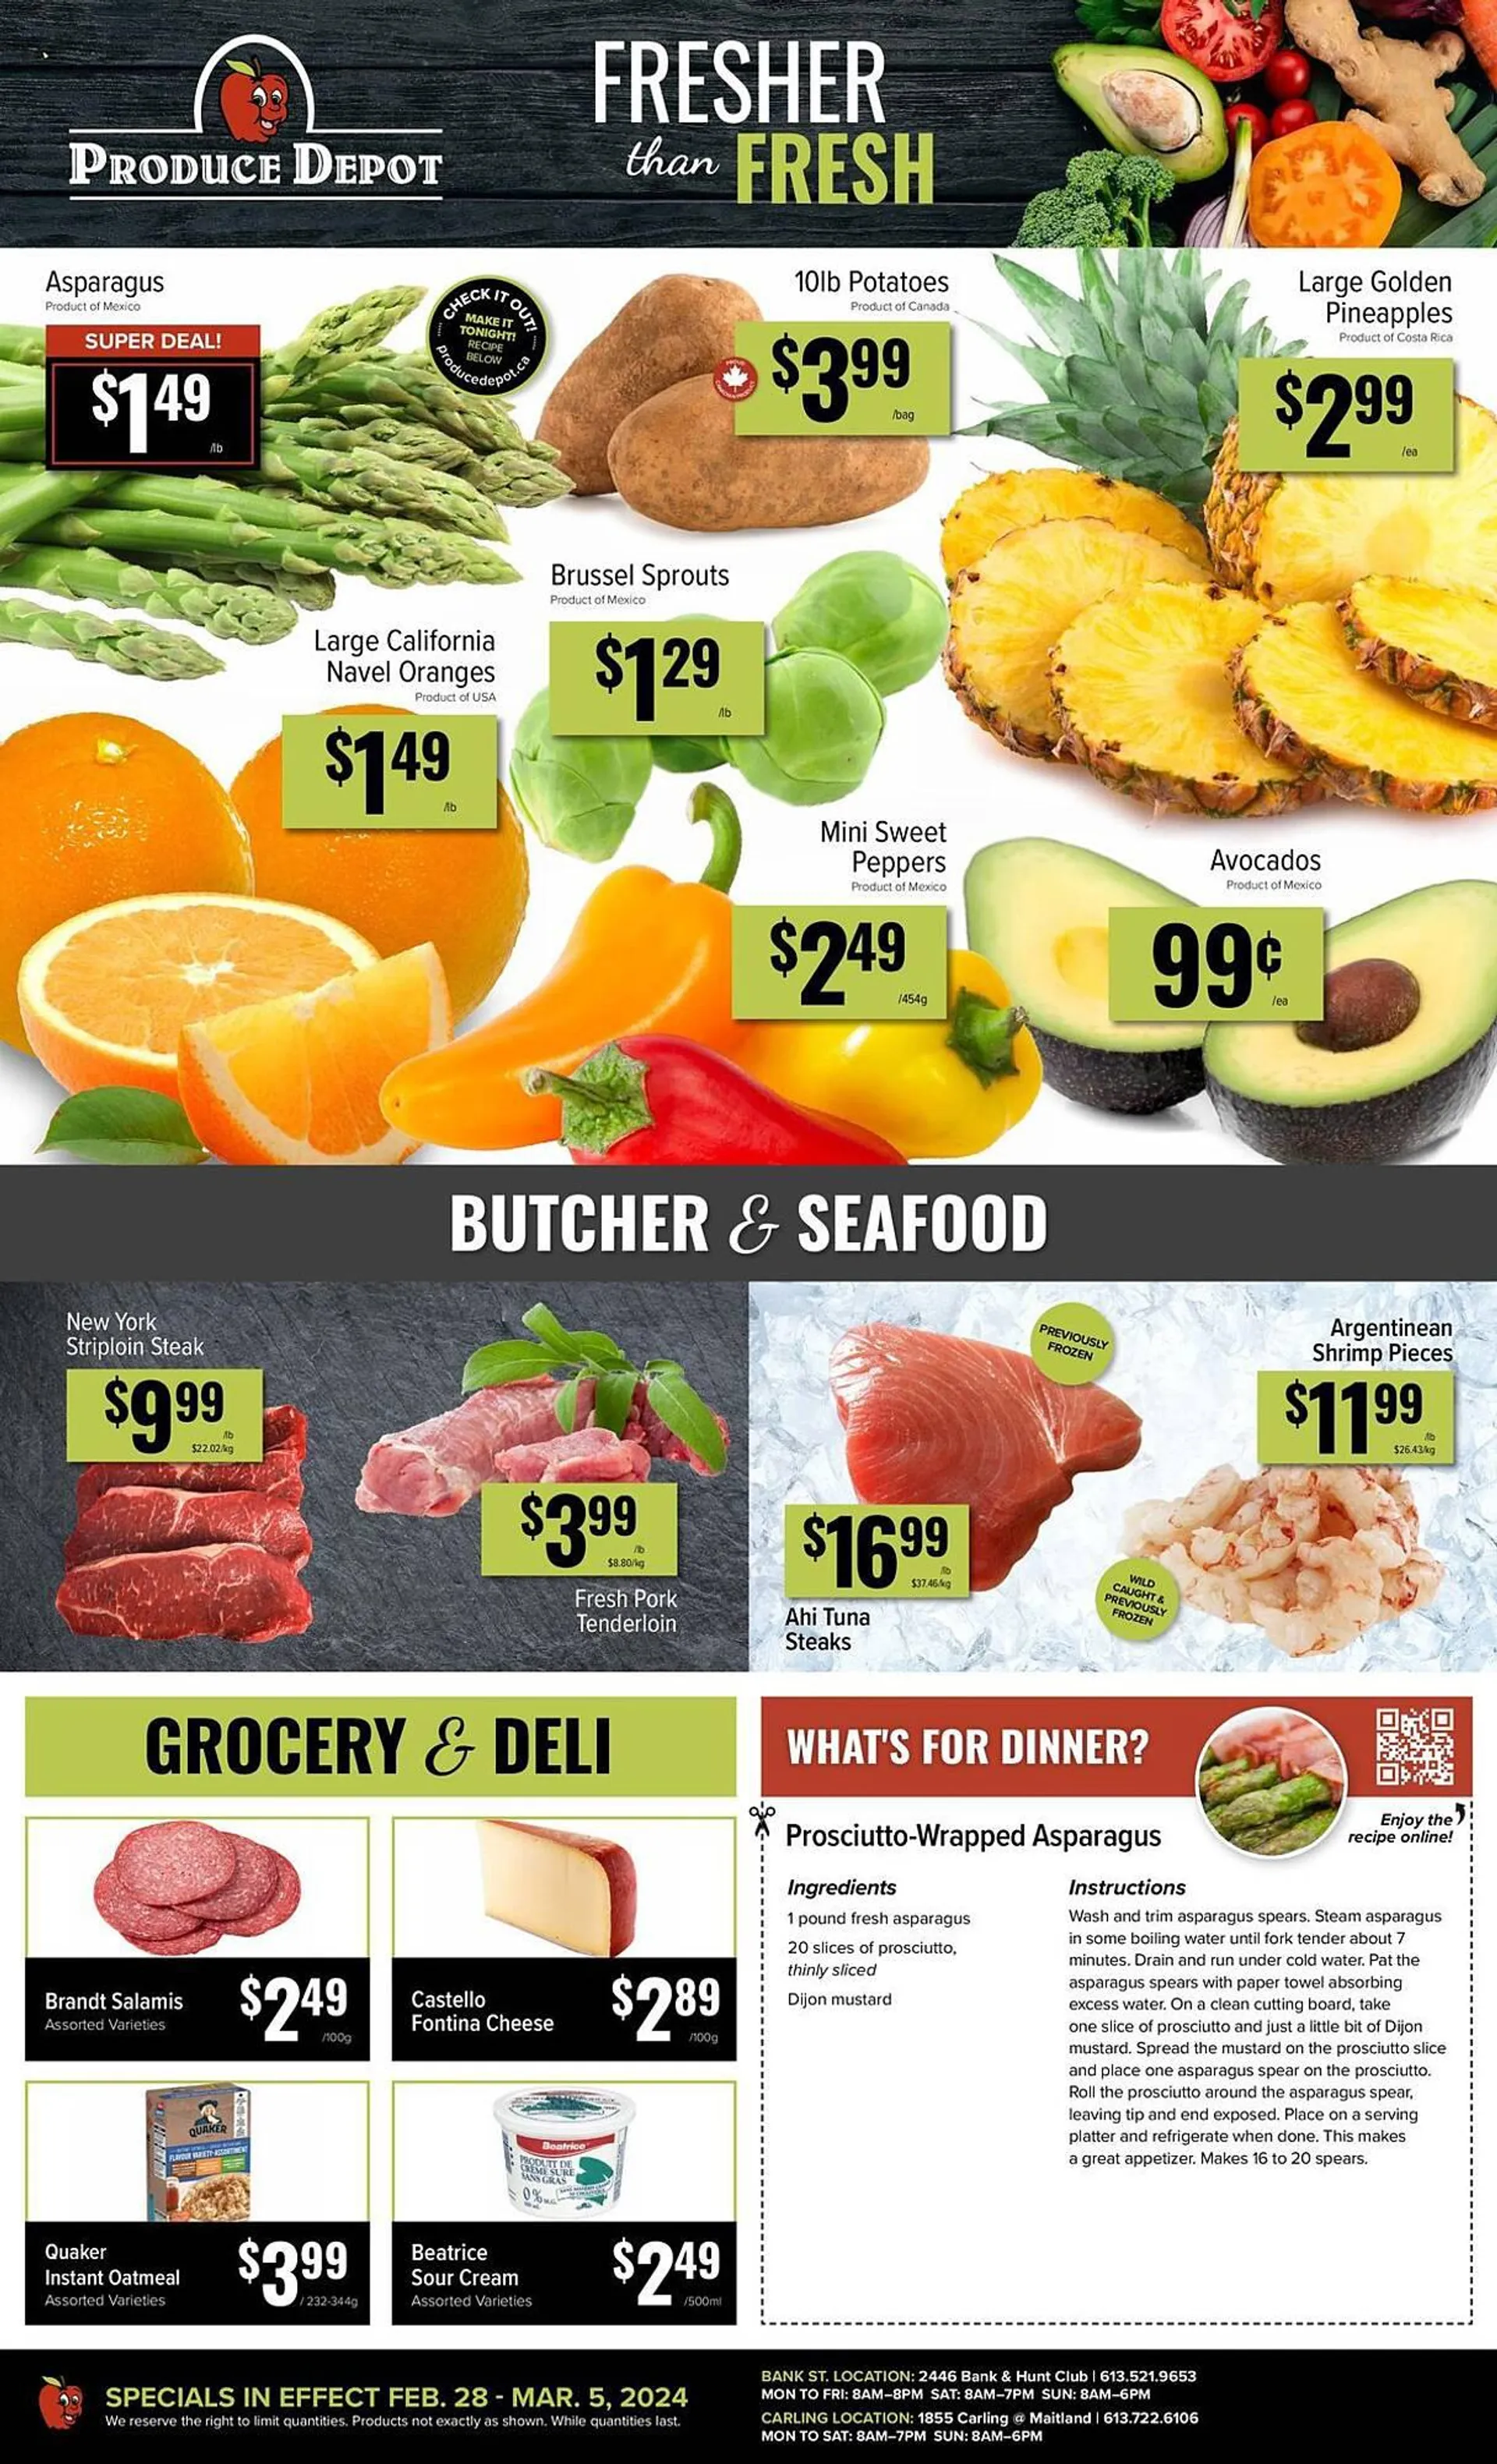 Produce Depot flyer from February 28 to March 5 2024 - flyer page 